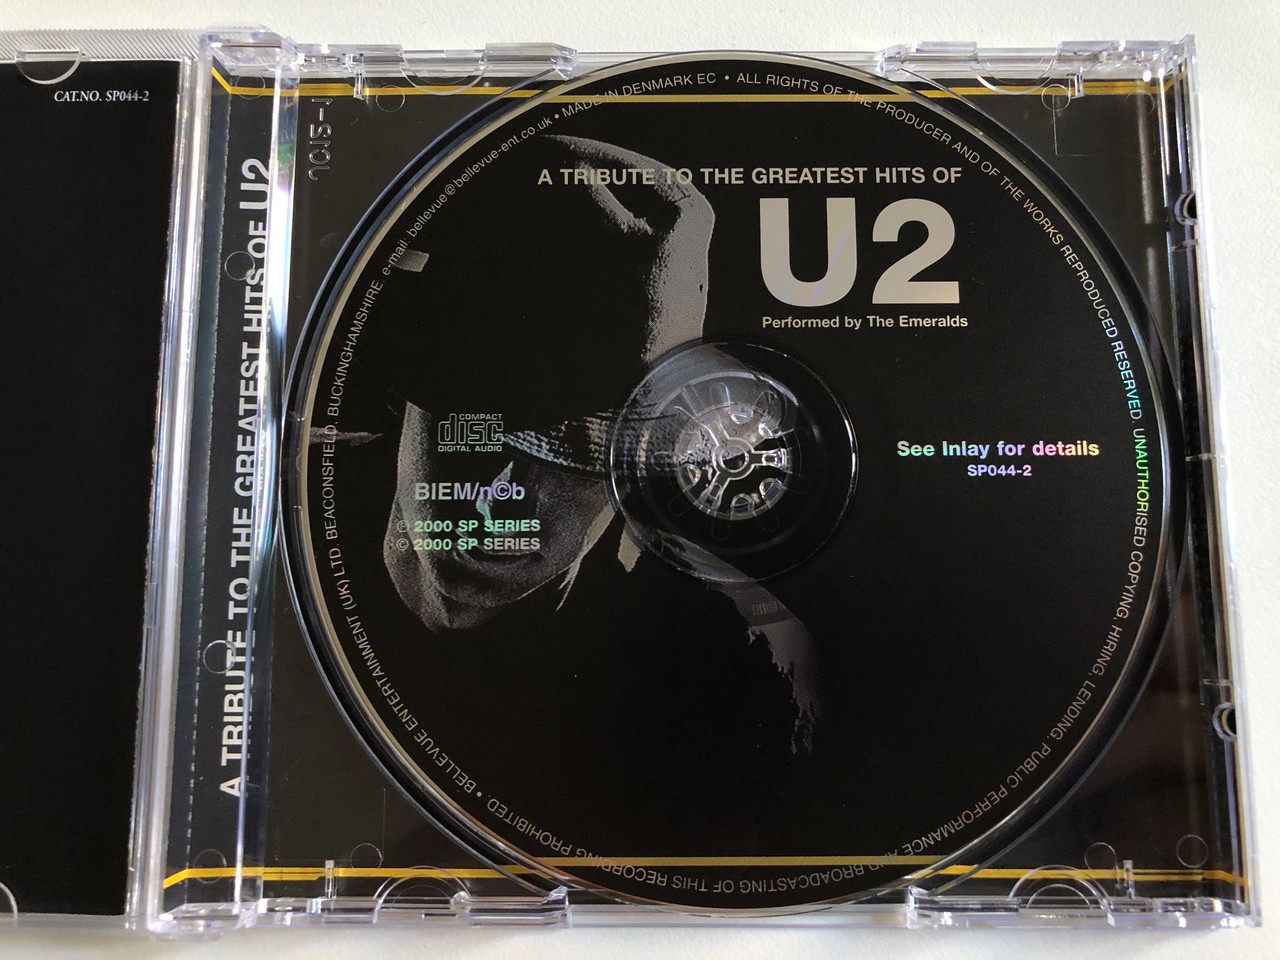 https://cdn10.bigcommerce.com/s-62bdpkt7pb/products/0/images/195262/A_Tribute_To_Their_Greatest_Hits_Of_U2_-_Performed_by_The_Emeralds_Featuring_Desire_One_With_or_Without_You_I_Still_Havent_Found_What_Im_Looking_For_and_many_more_SP_Series_Audio_CD_3__90576.1634029017.1280.1280.JPG?c=2&_gl=1*1hig4mo*_ga*MjA2NTIxMjE2MC4xNTkwNTEyNTMy*_ga_WS2VZYPC6G*MTYzNDAxNTU4Mi4xMjMuMS4xNjM0MDI4ODY5LjM2